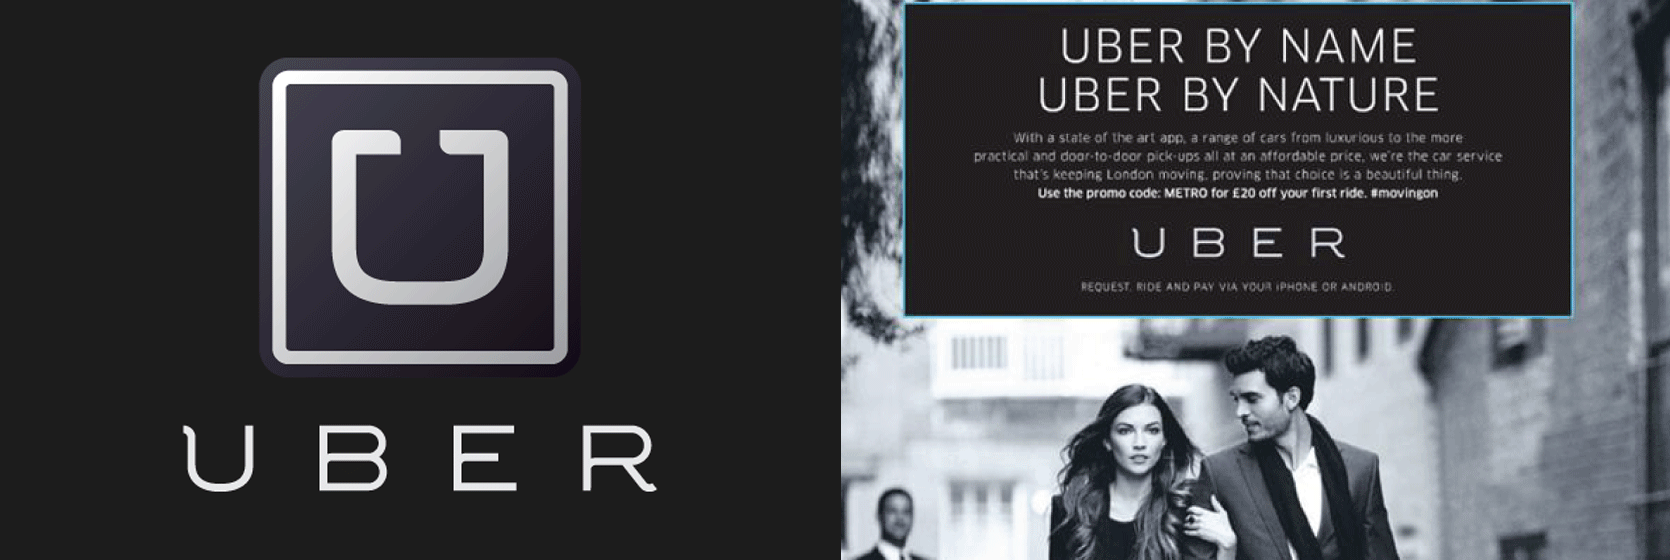 Uber Cool Logo - Landscape: Making the complex simple | 'Uber' Cool Brand Identity